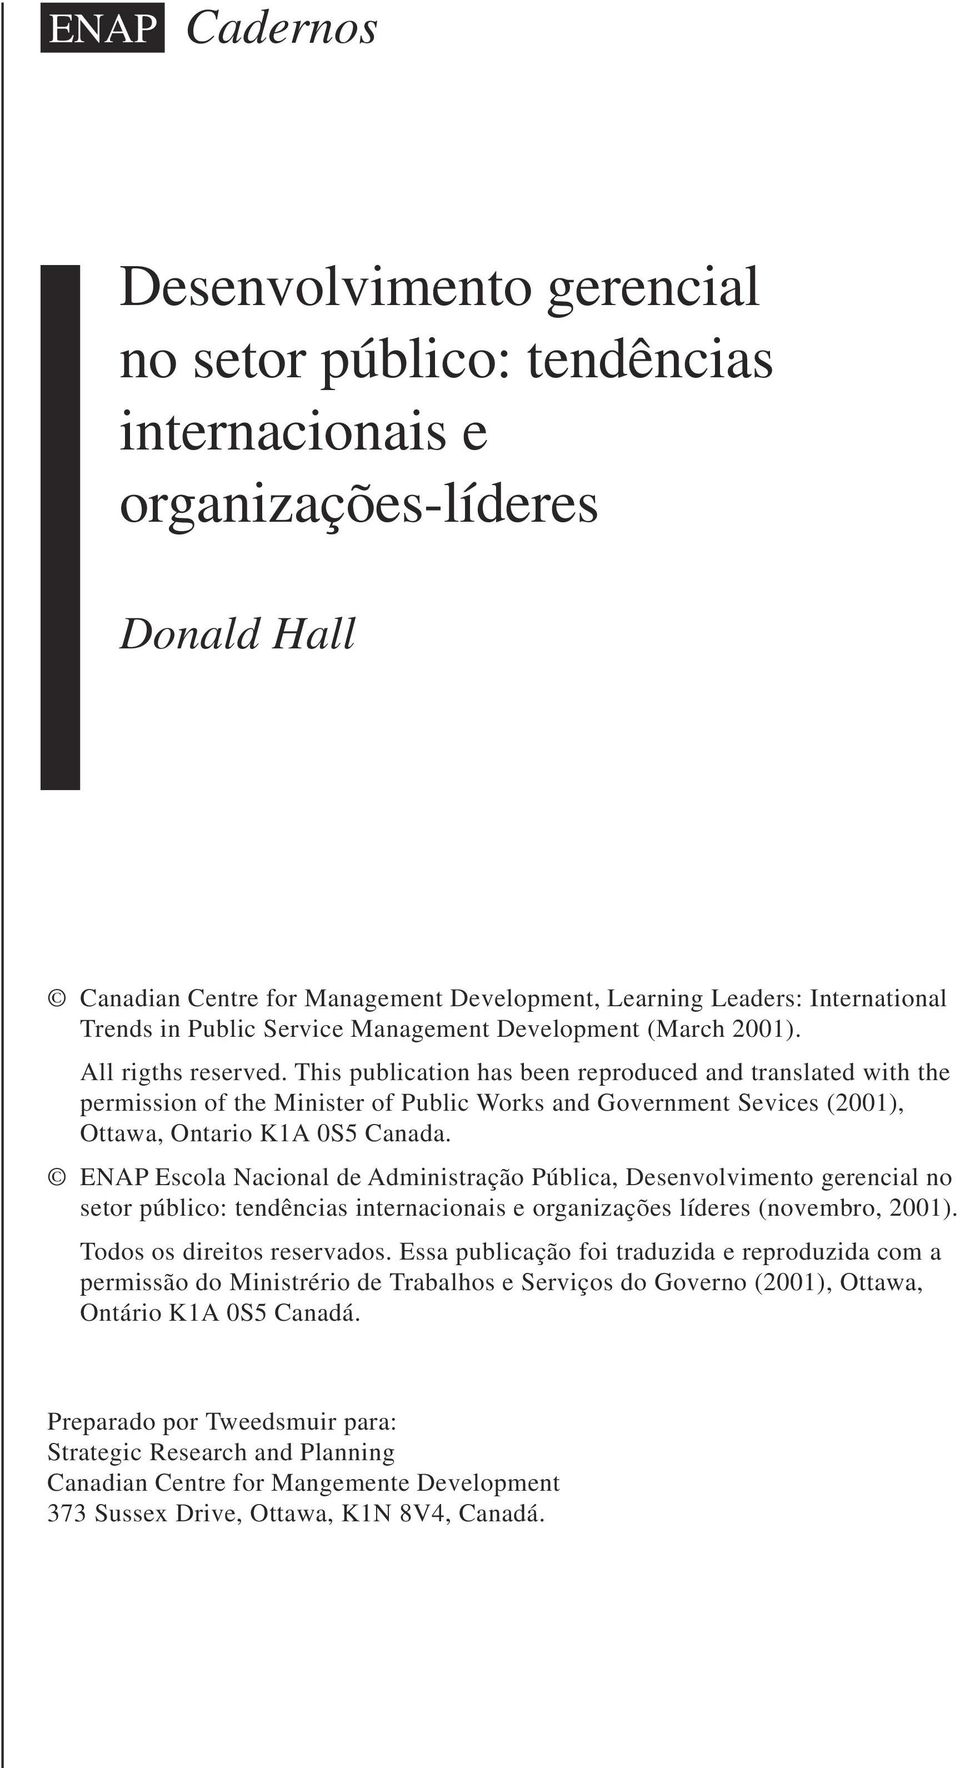 This publication has been reproduced and translated with the permission of the Minister of Public Works and Government Sevices (2001), Ottawa, Ontario K1A 0S5 Canada.